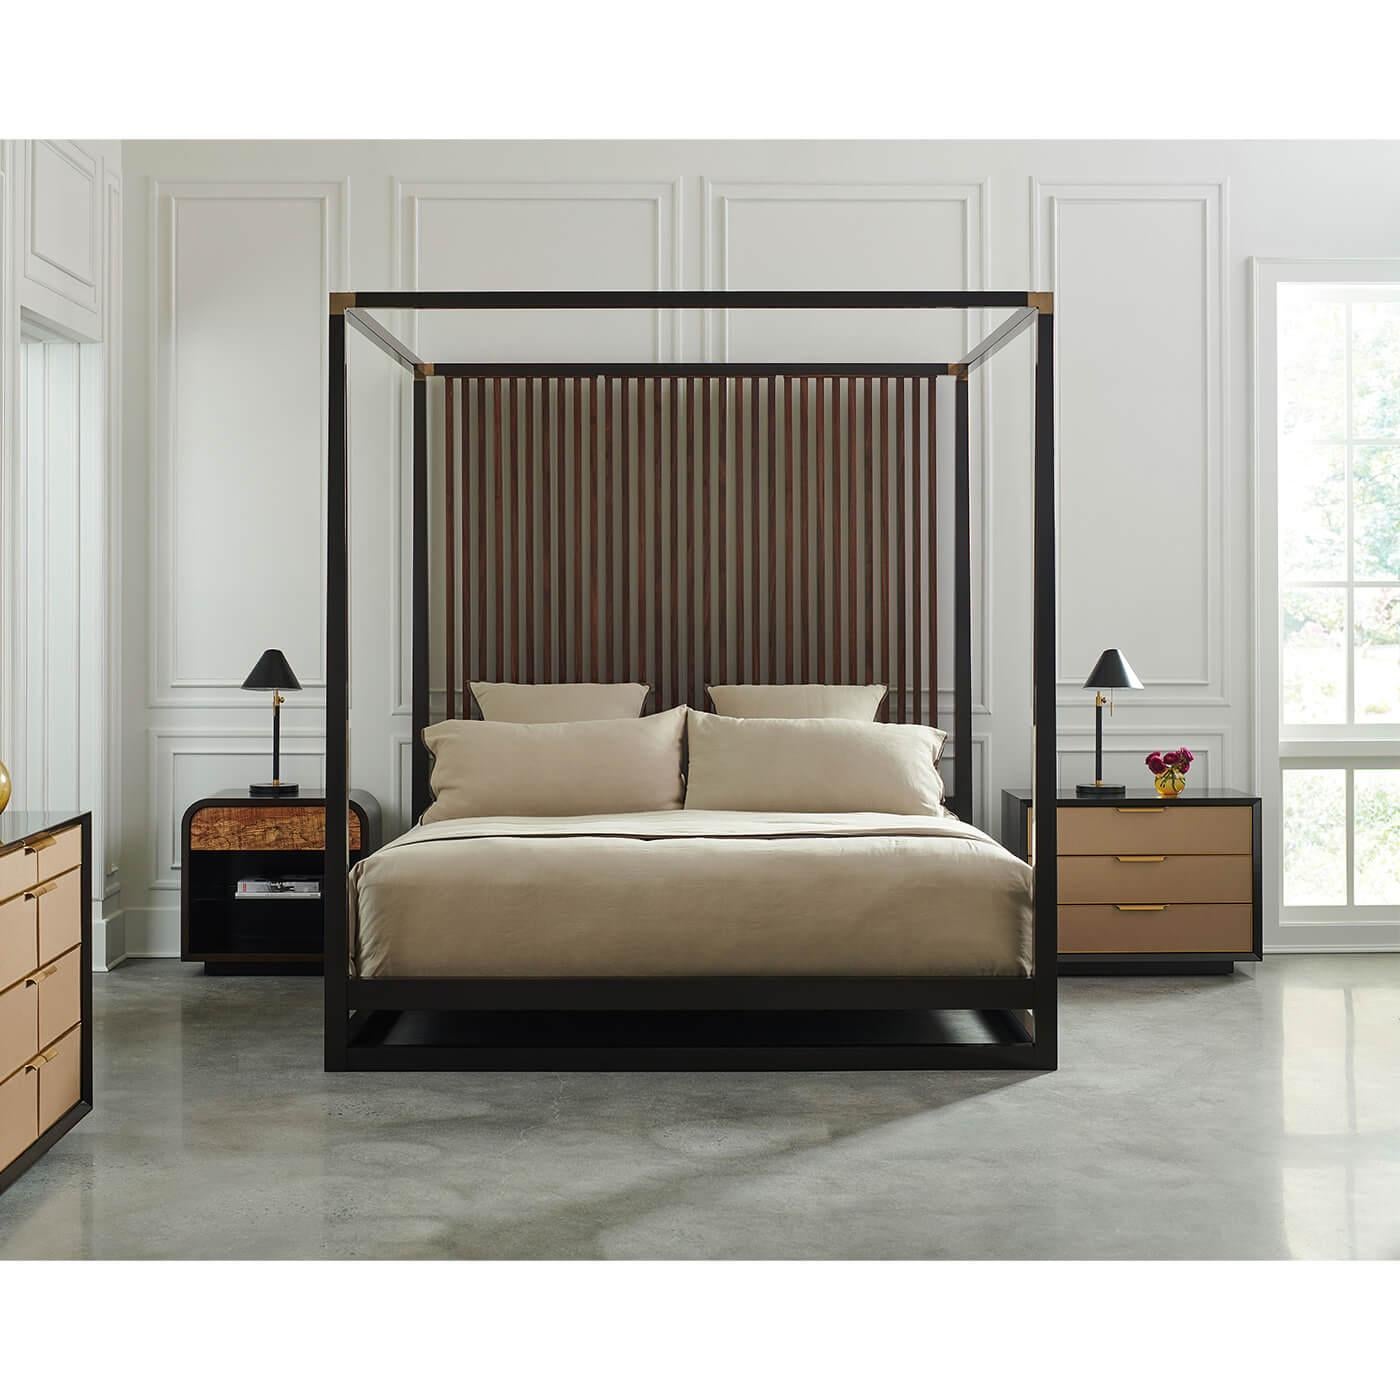 Wood Mid Century Modern Canopy Bed - California King